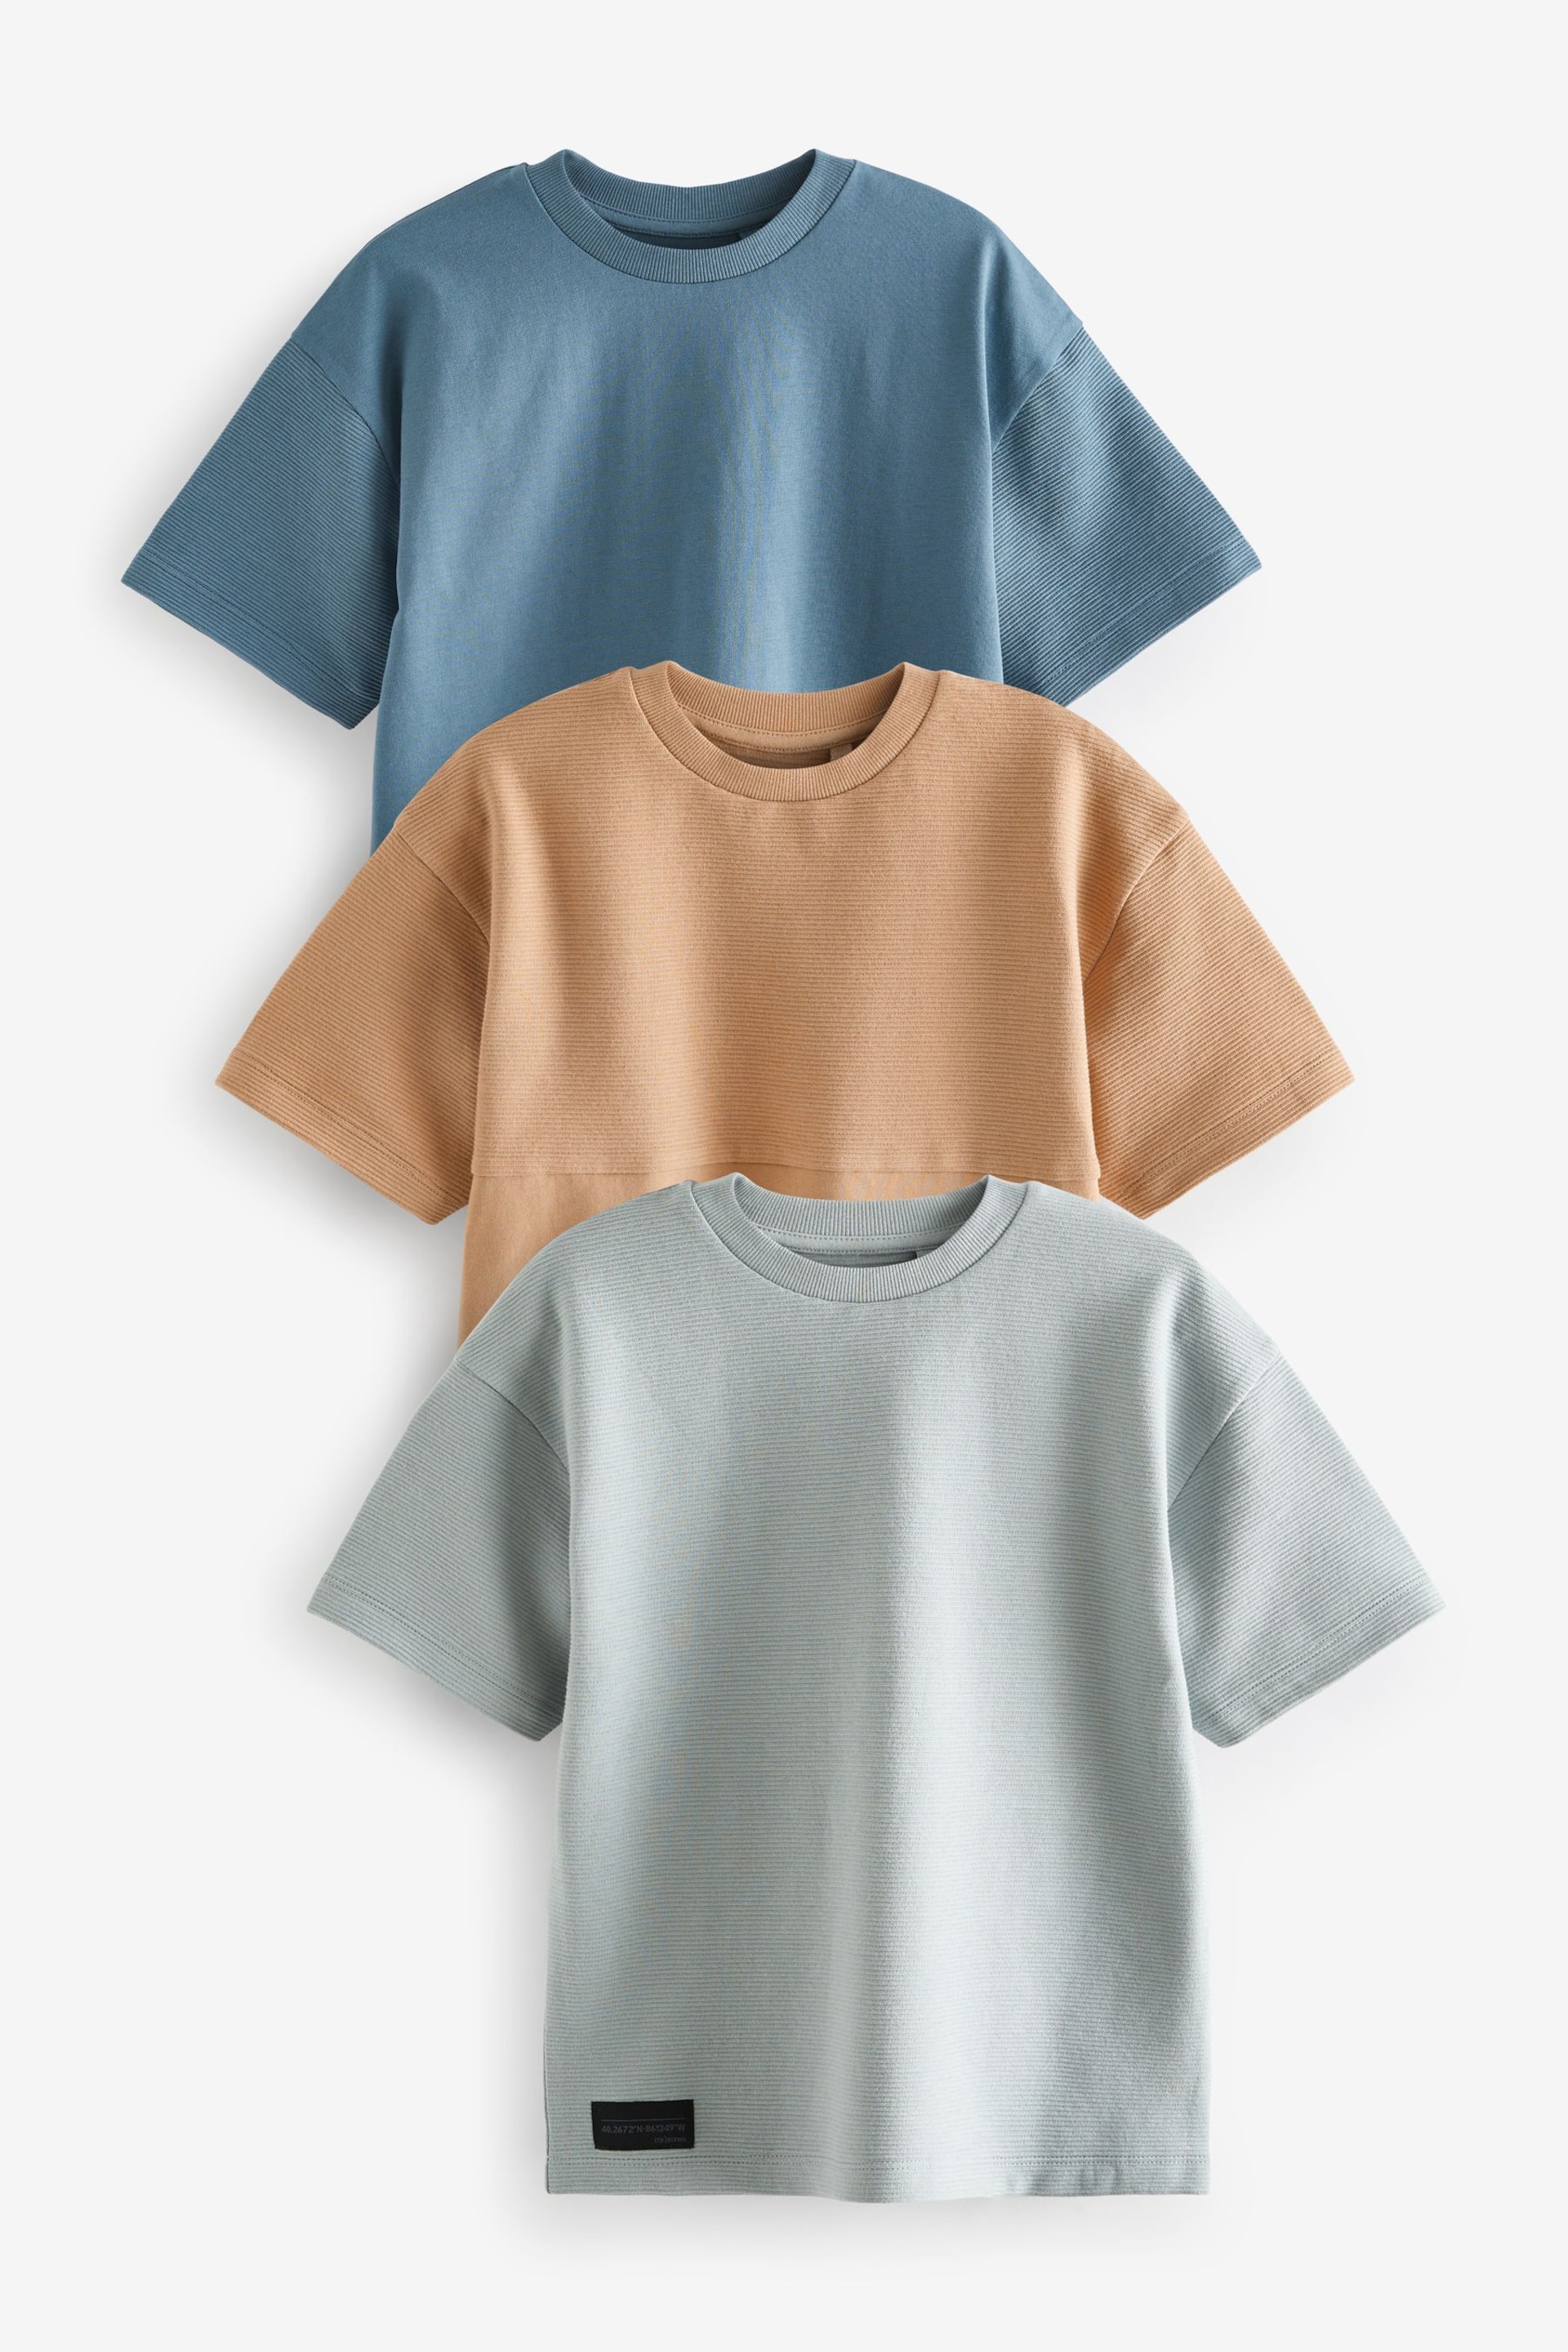 Blue/Tan Brown Oversized T-Shirts 3 Pack (3-16yrs) - Image 1 of 3